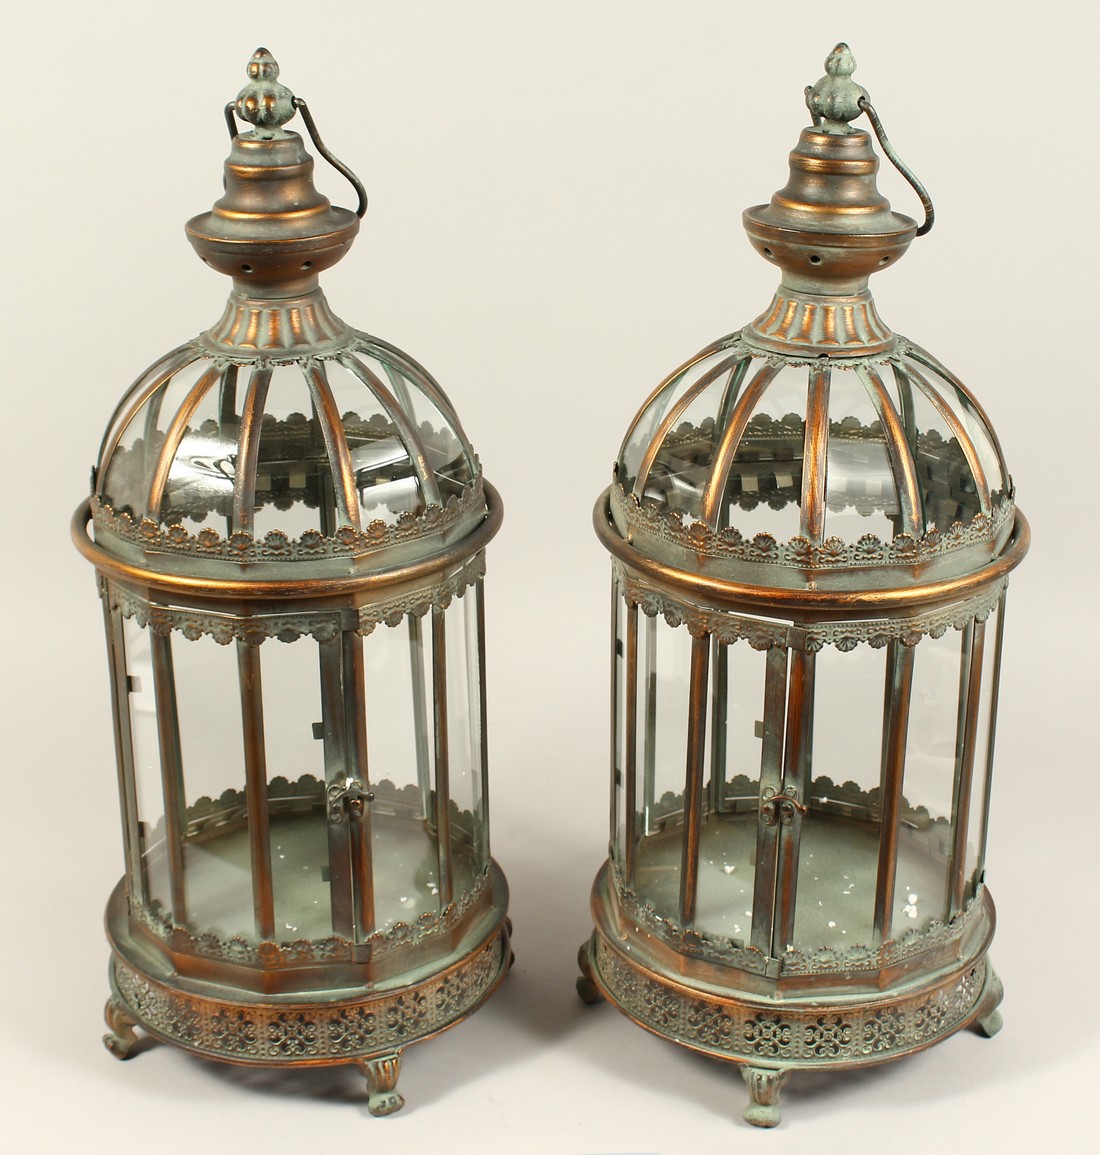 A PAIR OF METAL AND GLASS LANTERNS